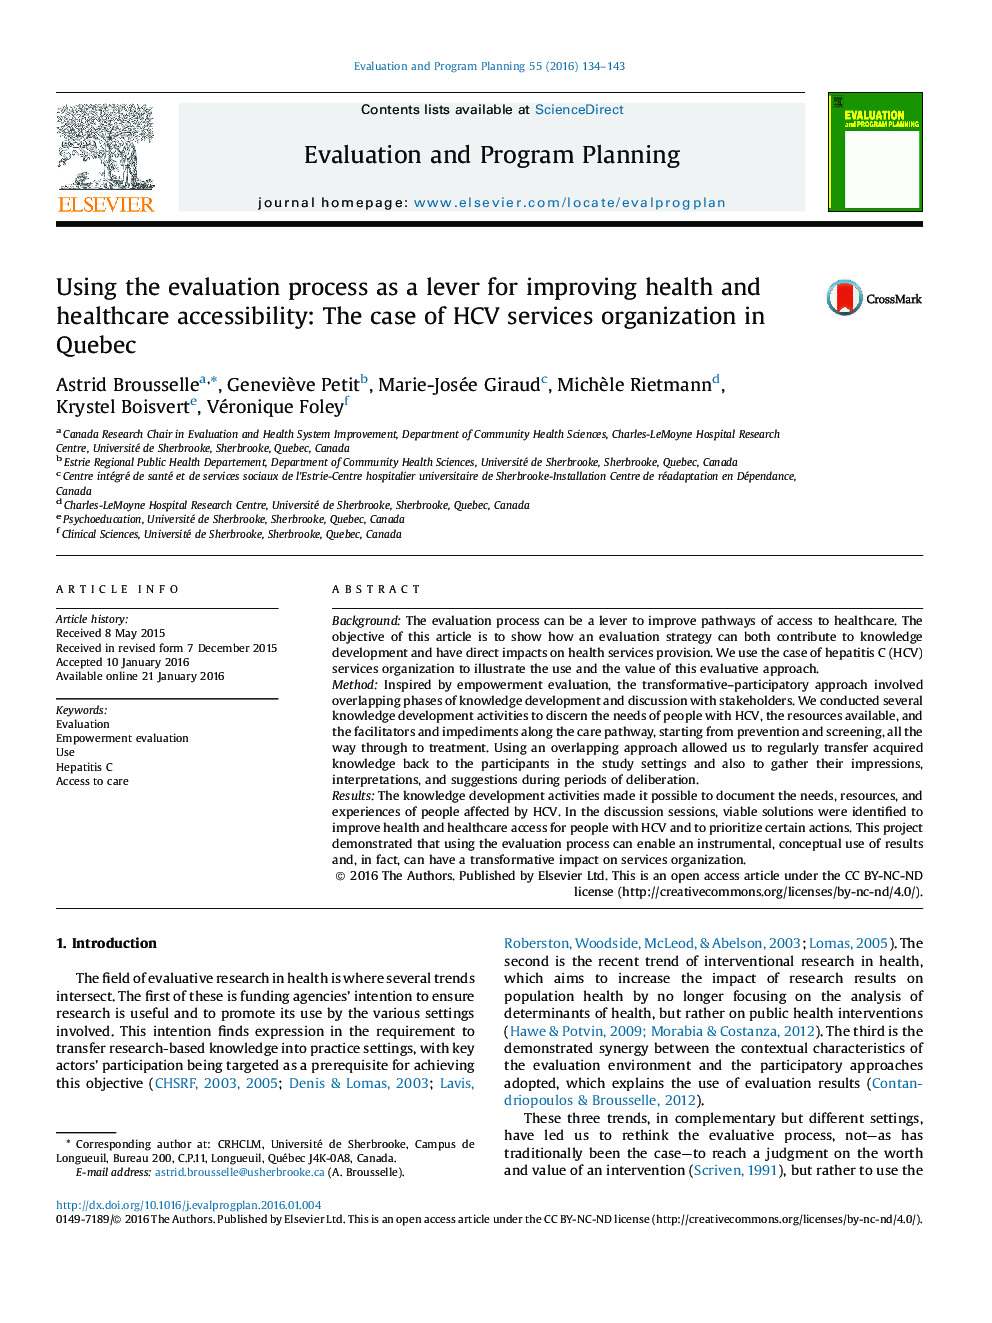 Using the evaluation process as a lever for improving health and healthcare accessibility: The case of HCV services organization in Quebec